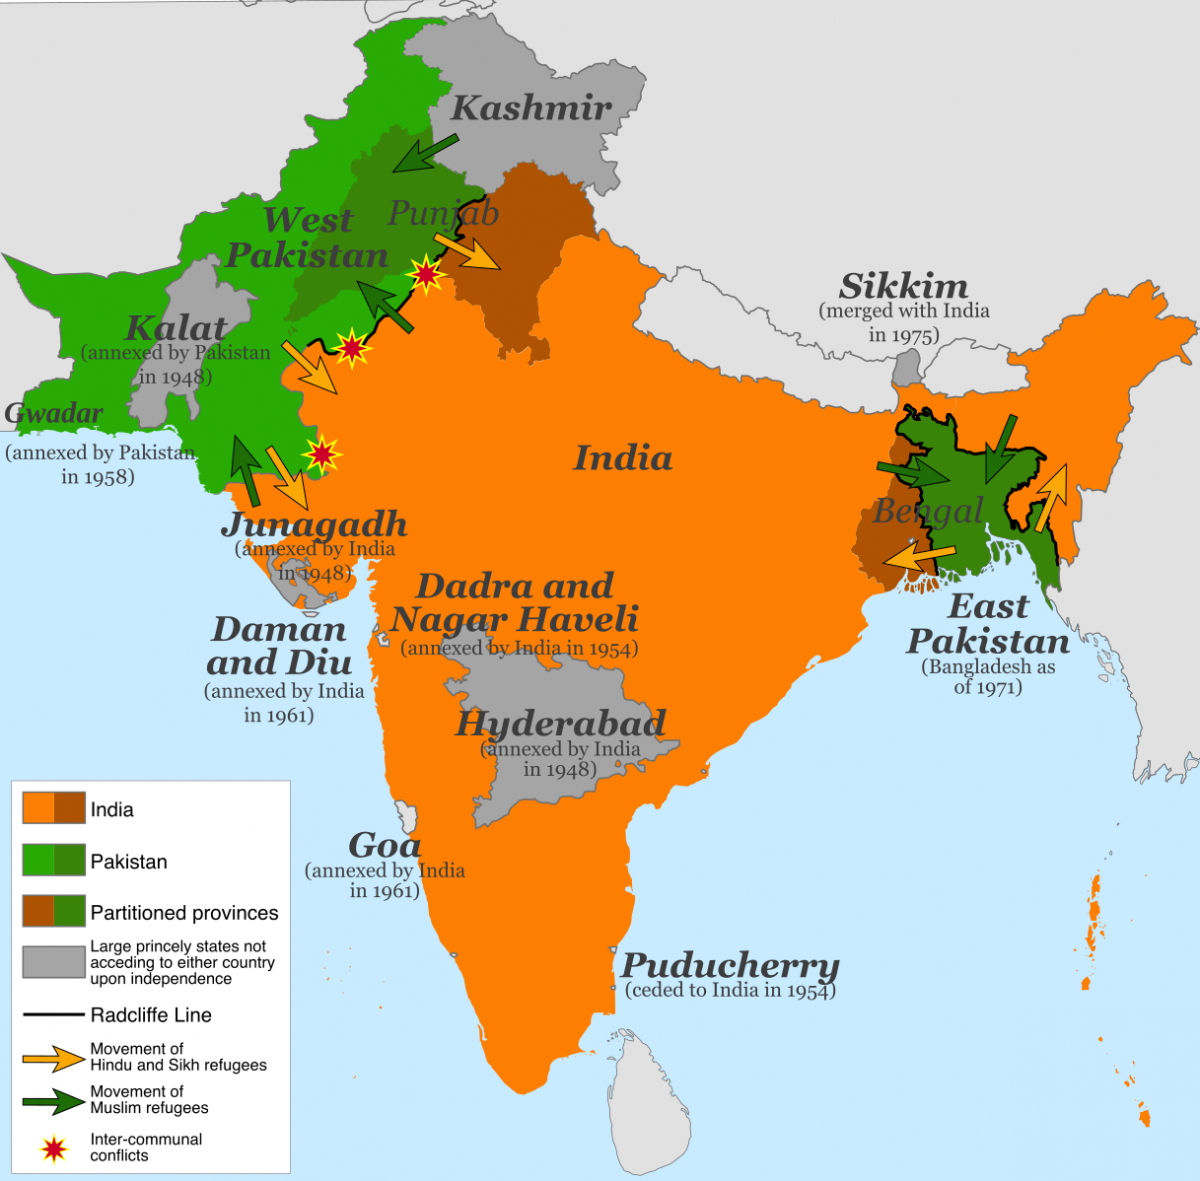 Map of the partition of India and Pakistan in 1947.